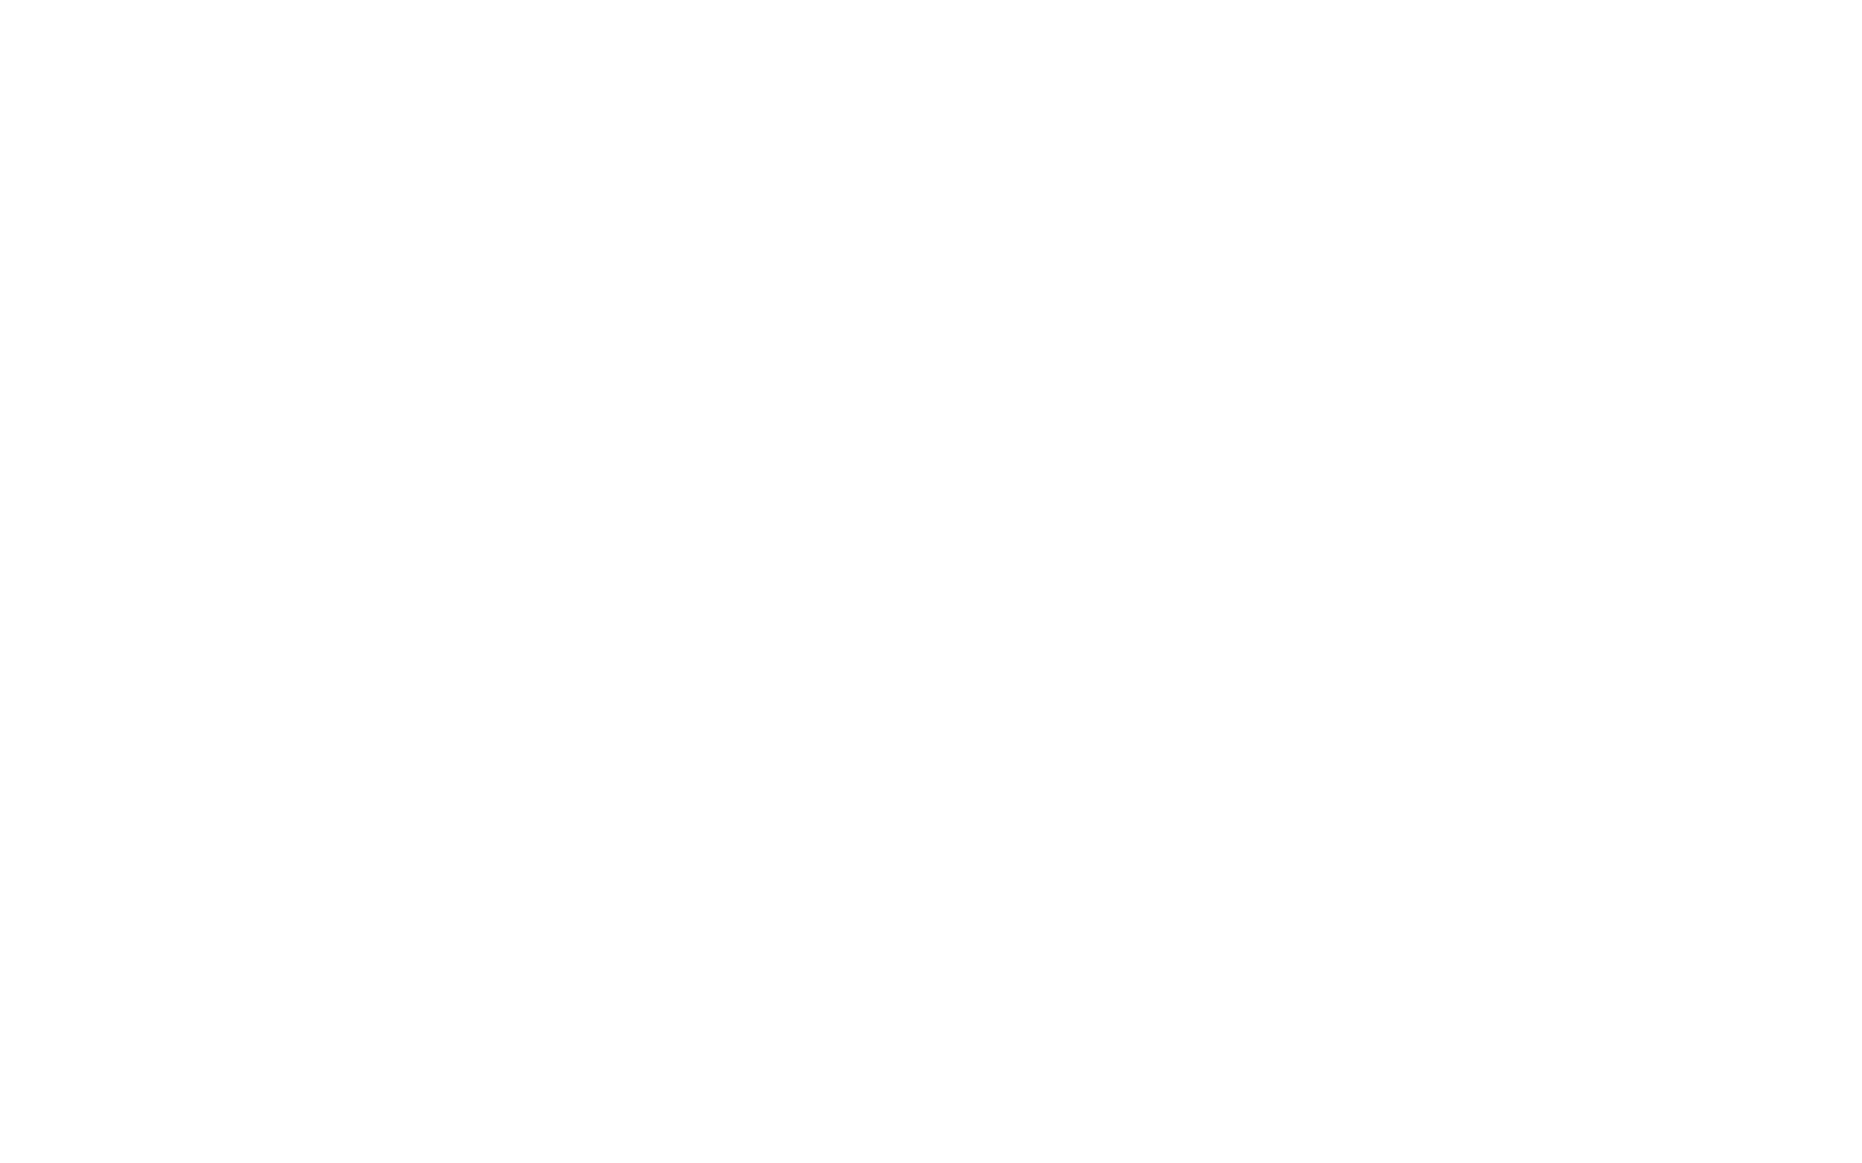 Make Others Great